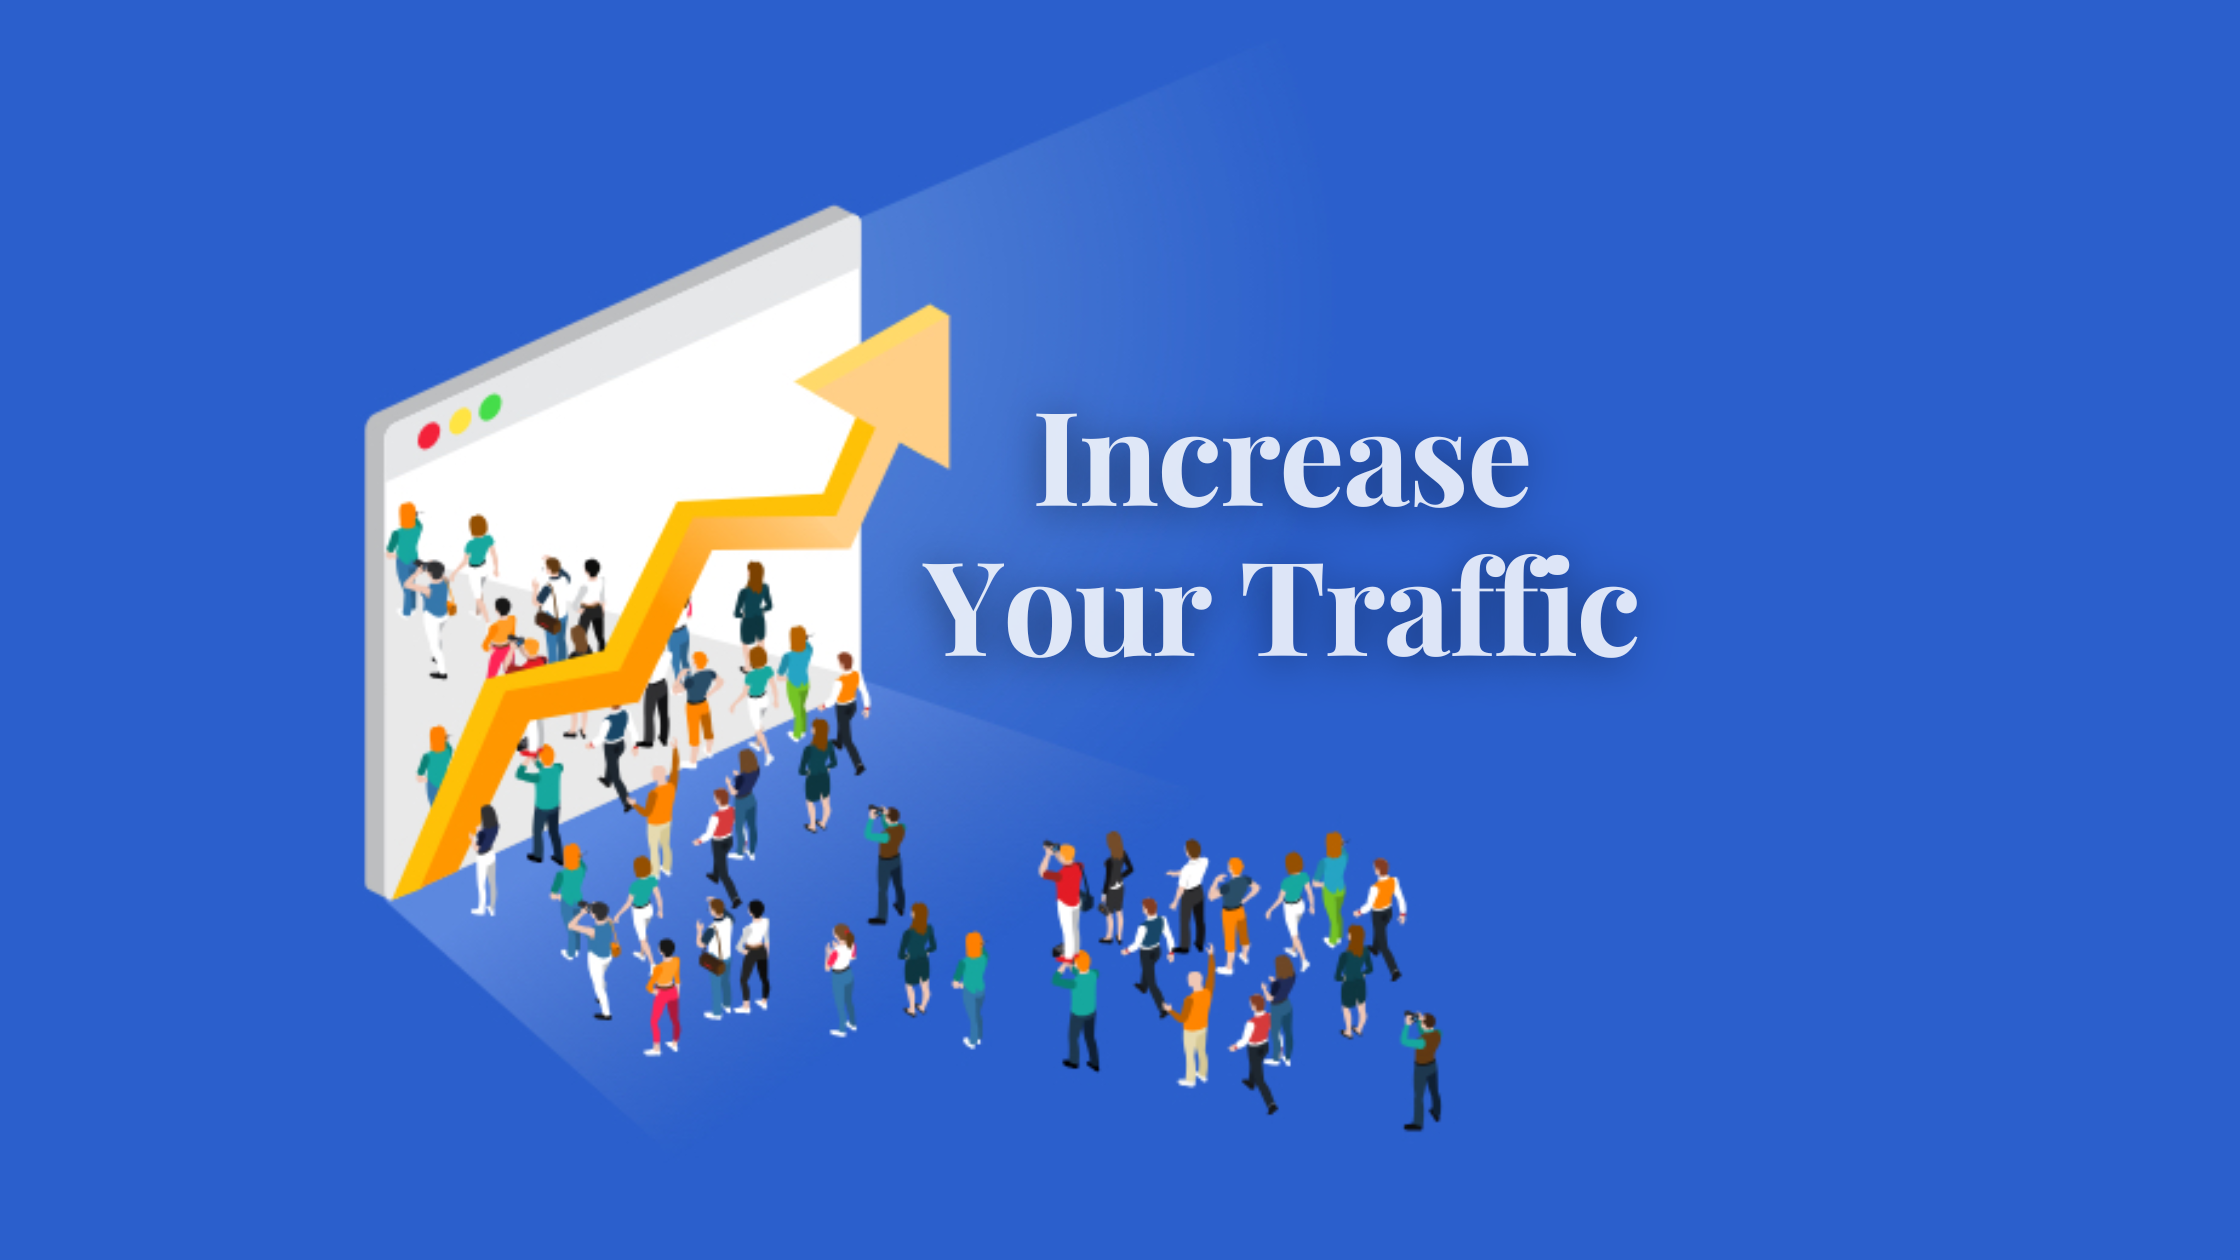 Local Online Business Listings Can Increase Your Traffic